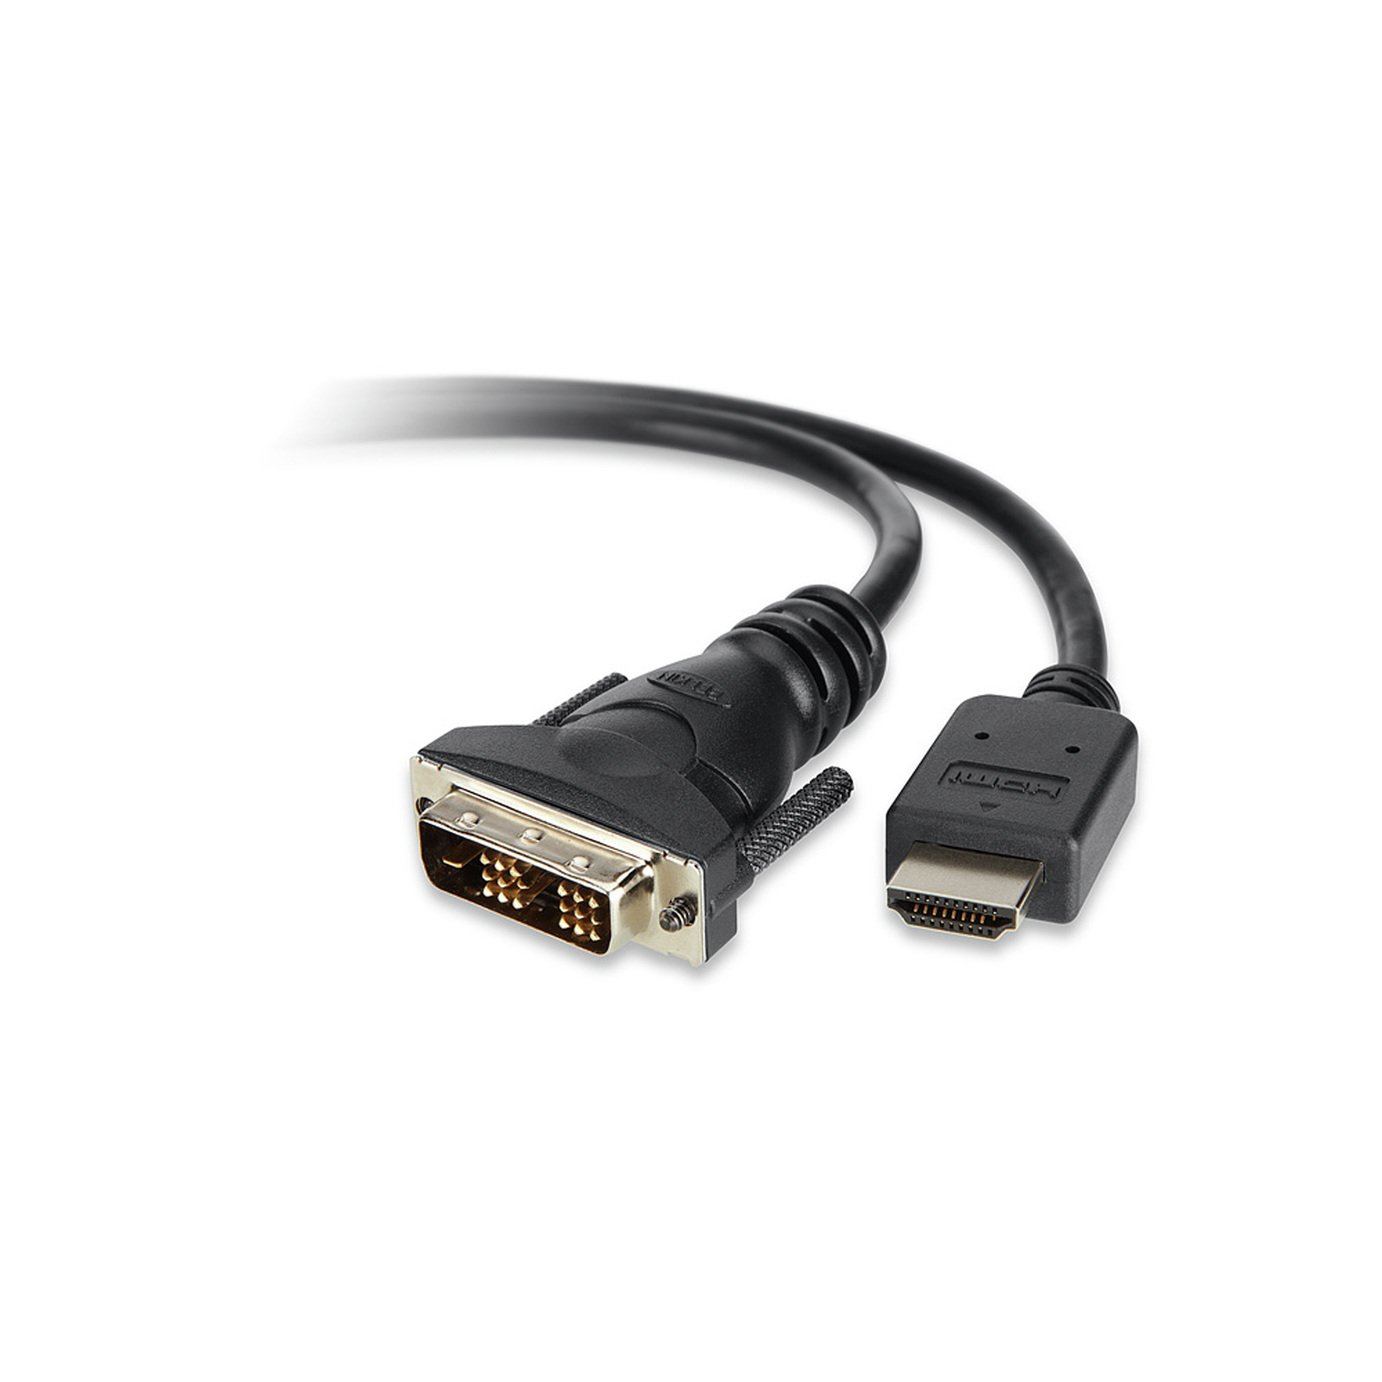 Belkin 1.8m DVI to HDMI Cable Review